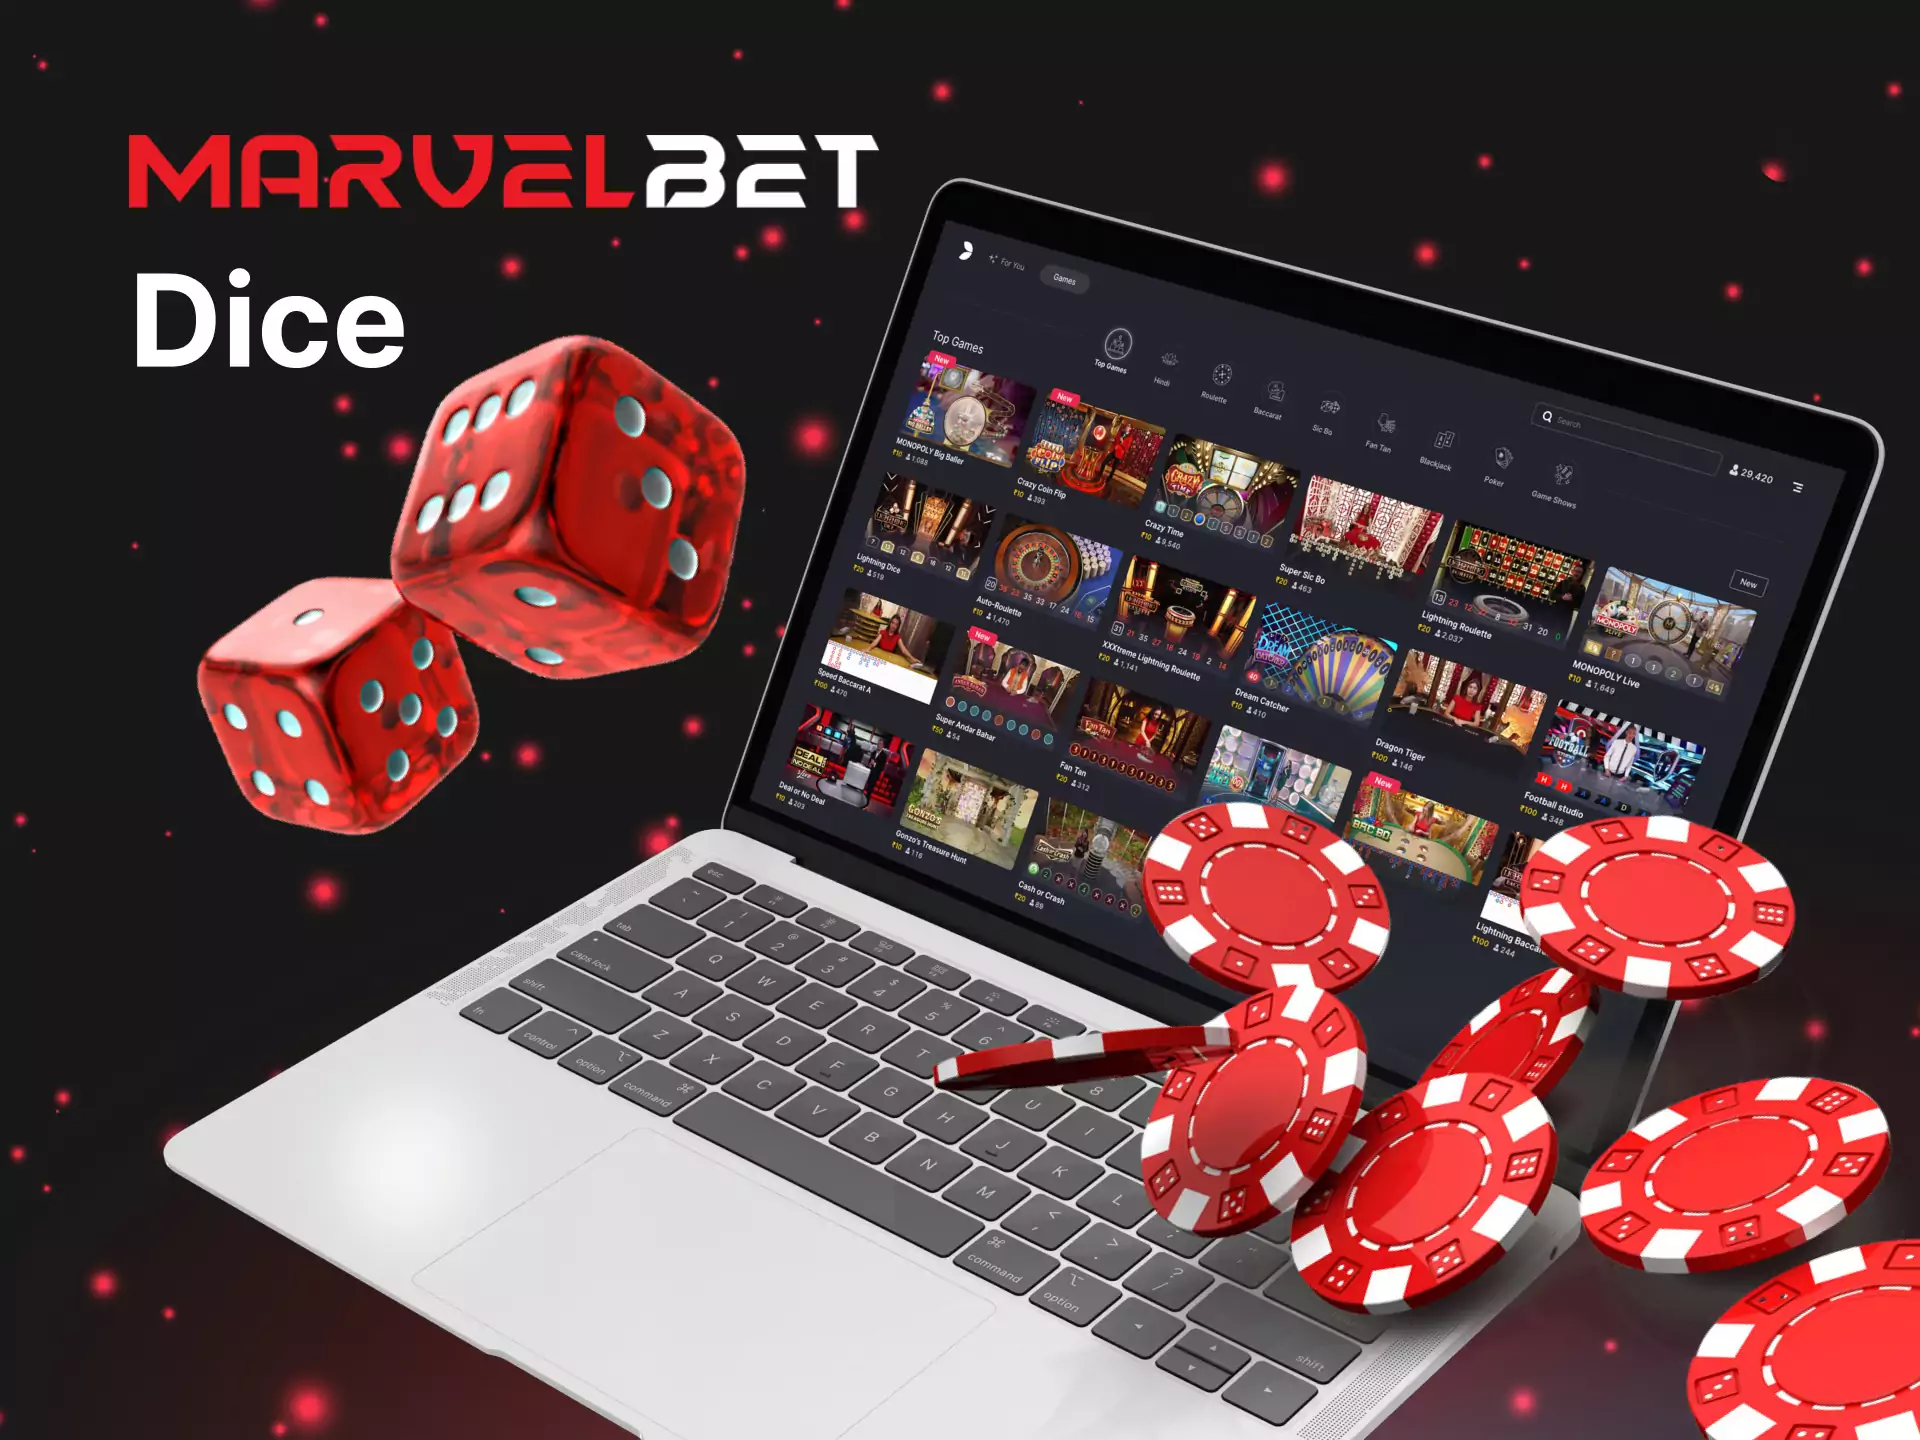 Check your luck in the Dice games of the Marvelbet Casino.